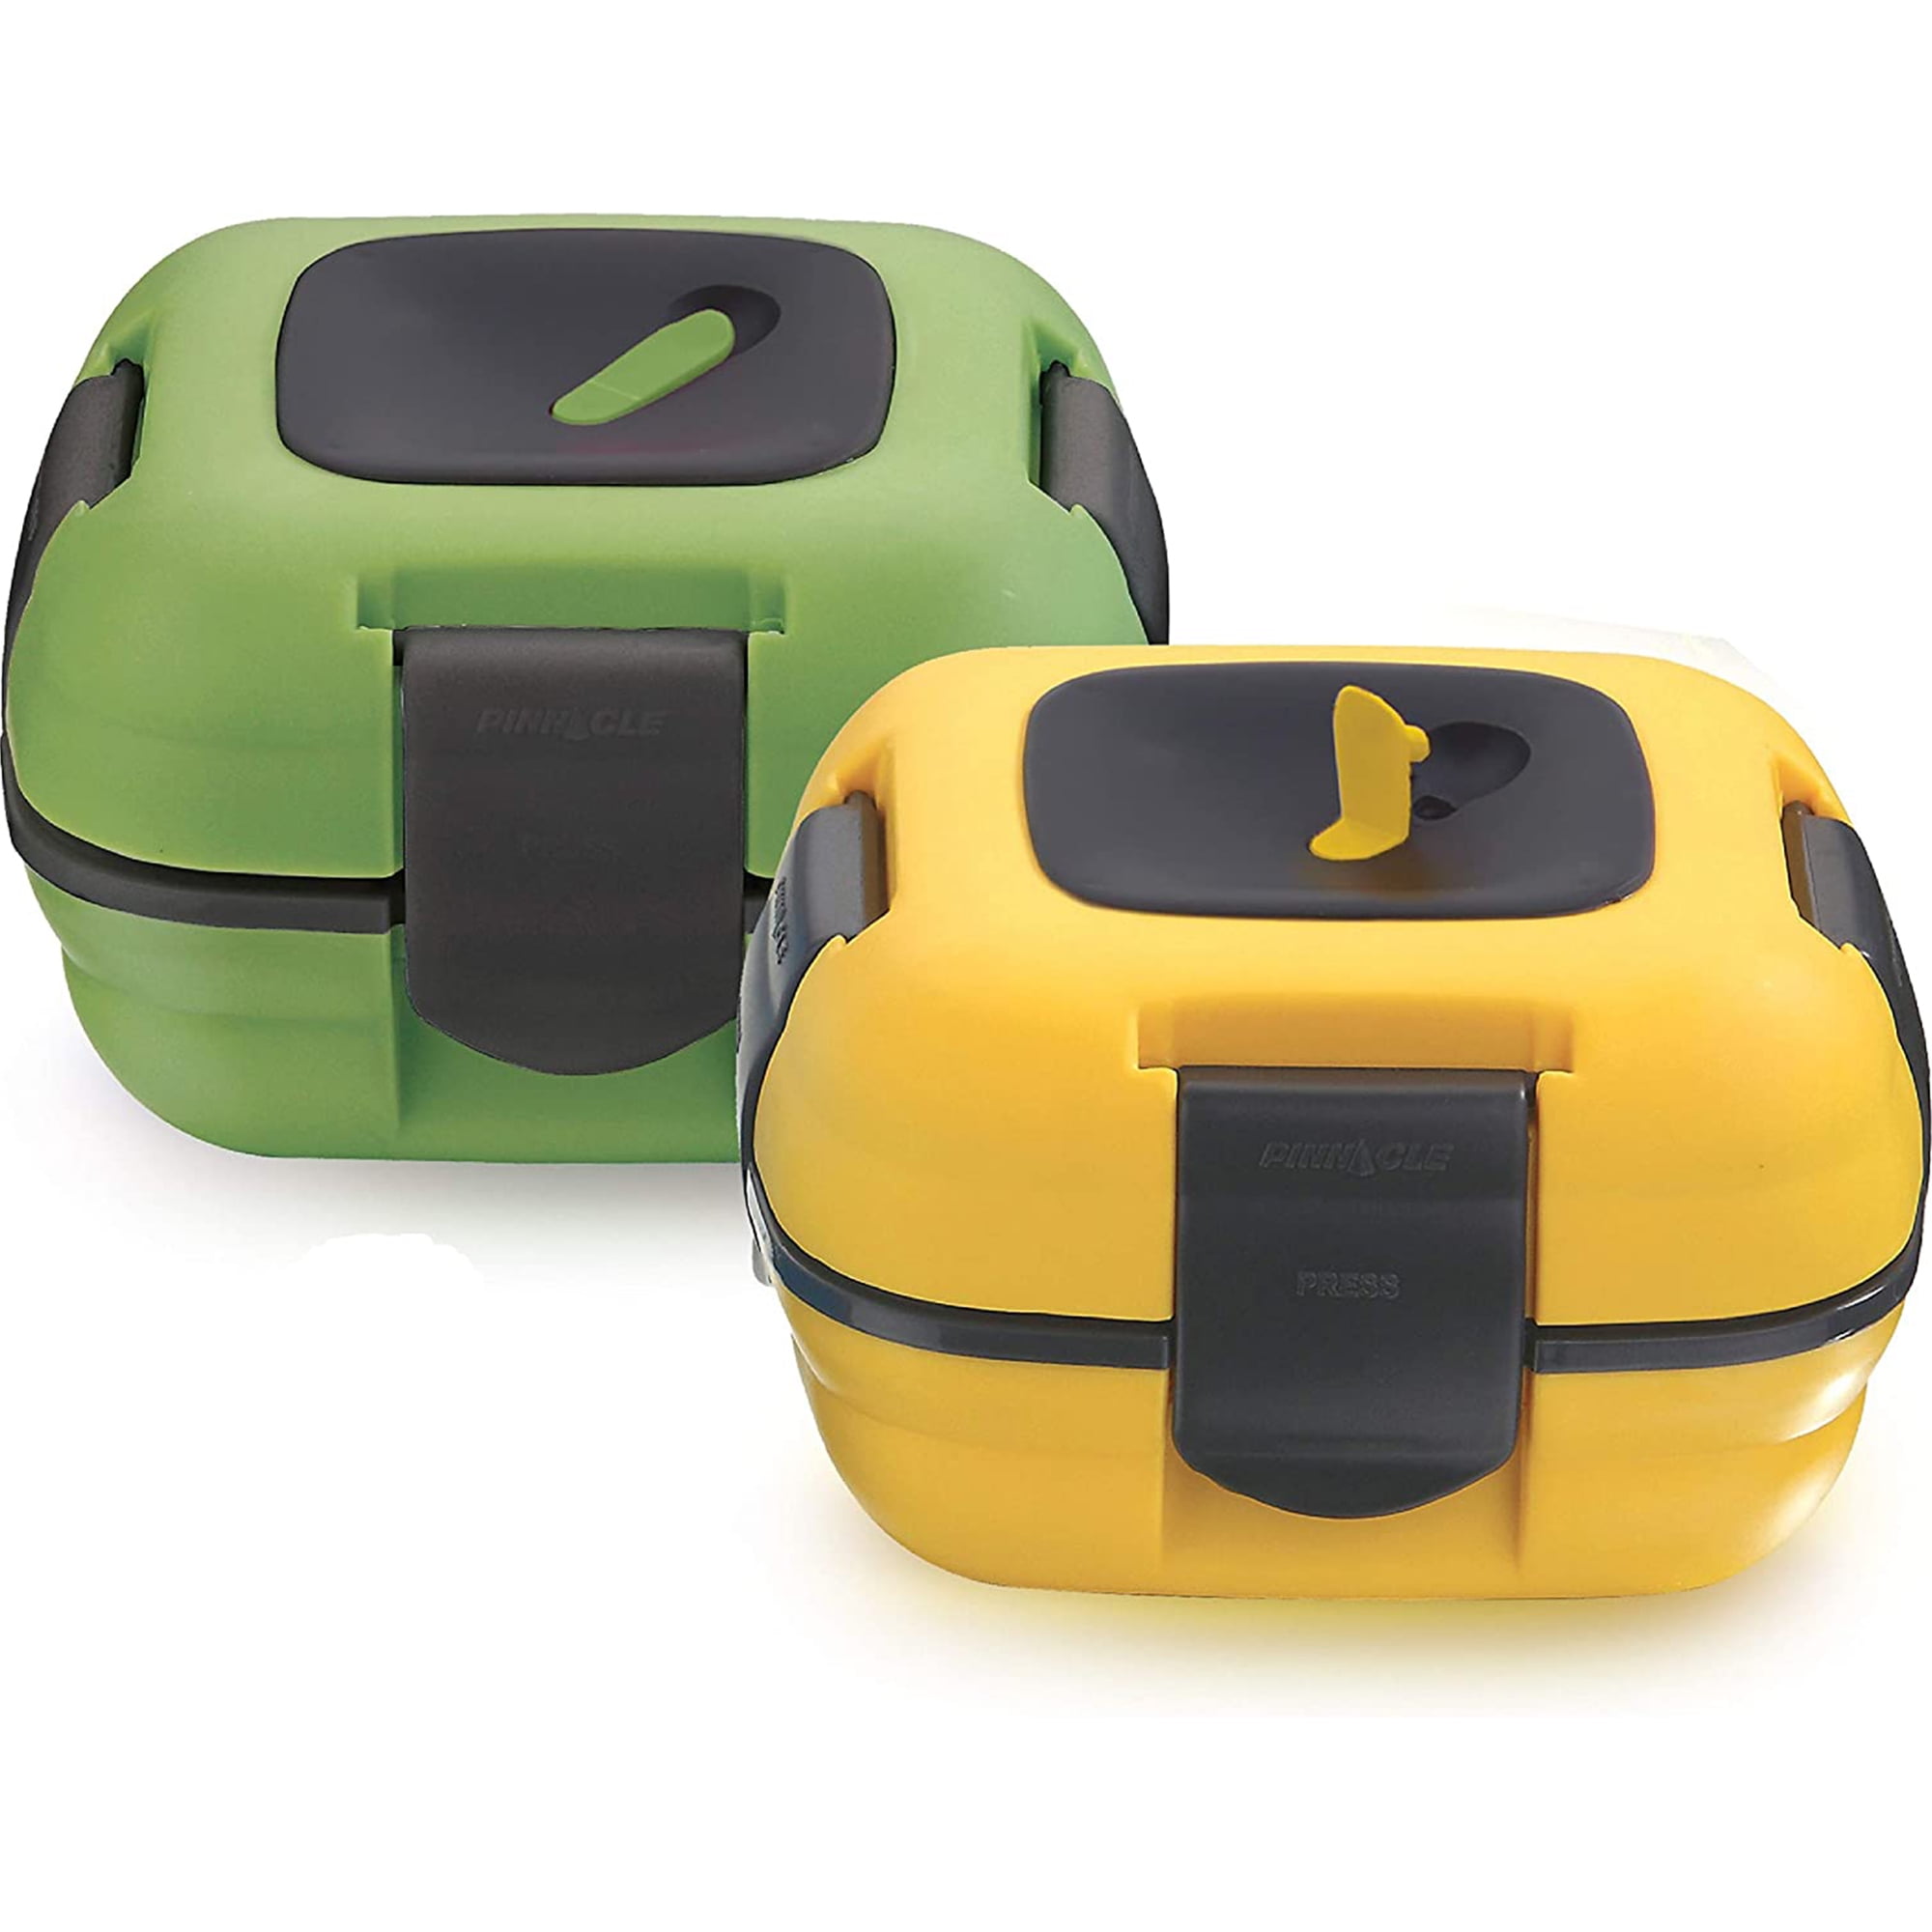 Pinnacle Thermoware 2-Pc Leak Proof Insulated Lunch Box Hot Food Container  Set, Green & Yellow 